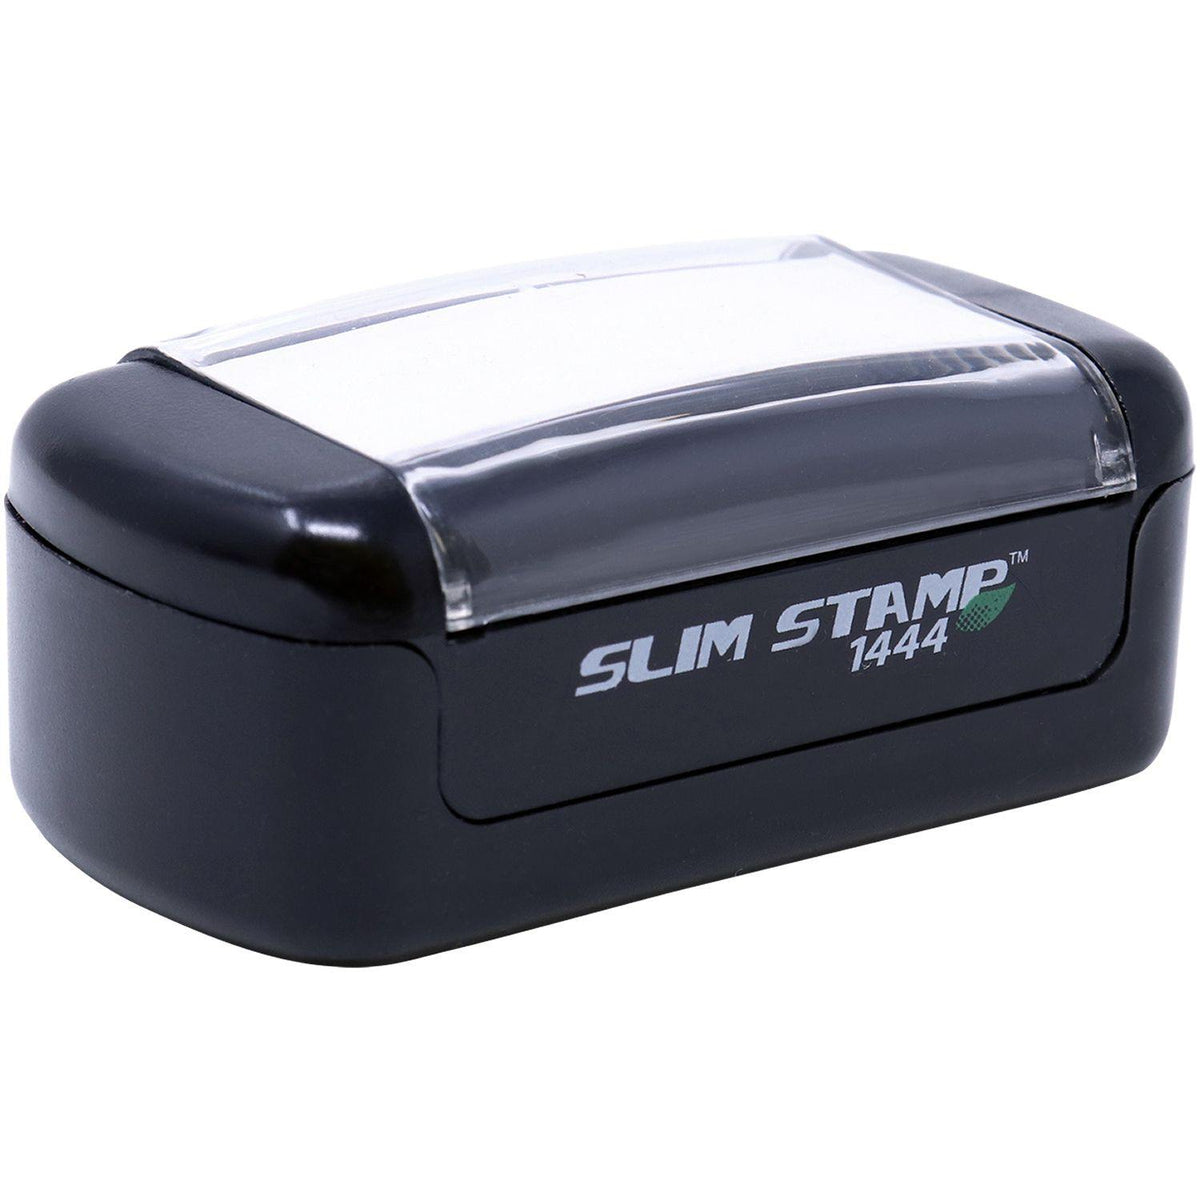 Alt View of Slim Pre-Inked Times First Class Mail Stamp Mount Angle